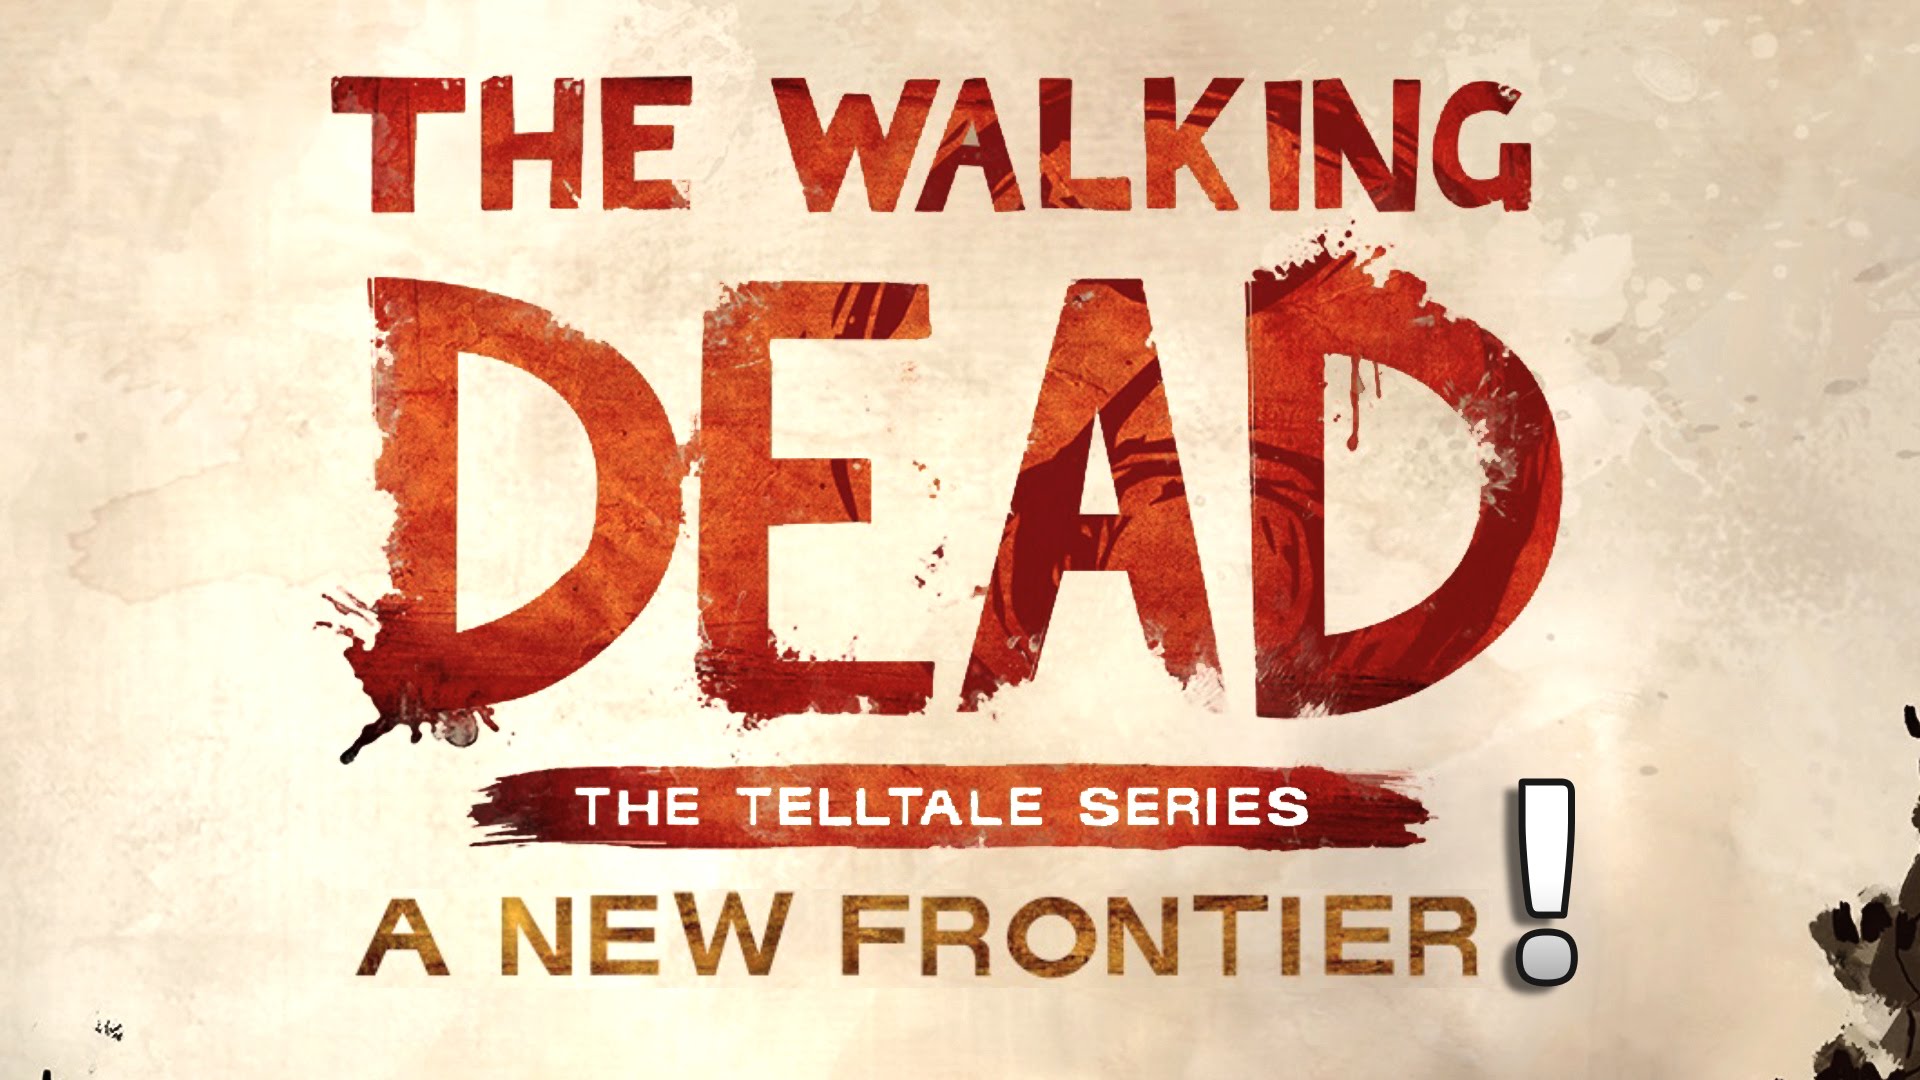 The Walking Dead: A New Frontier #23